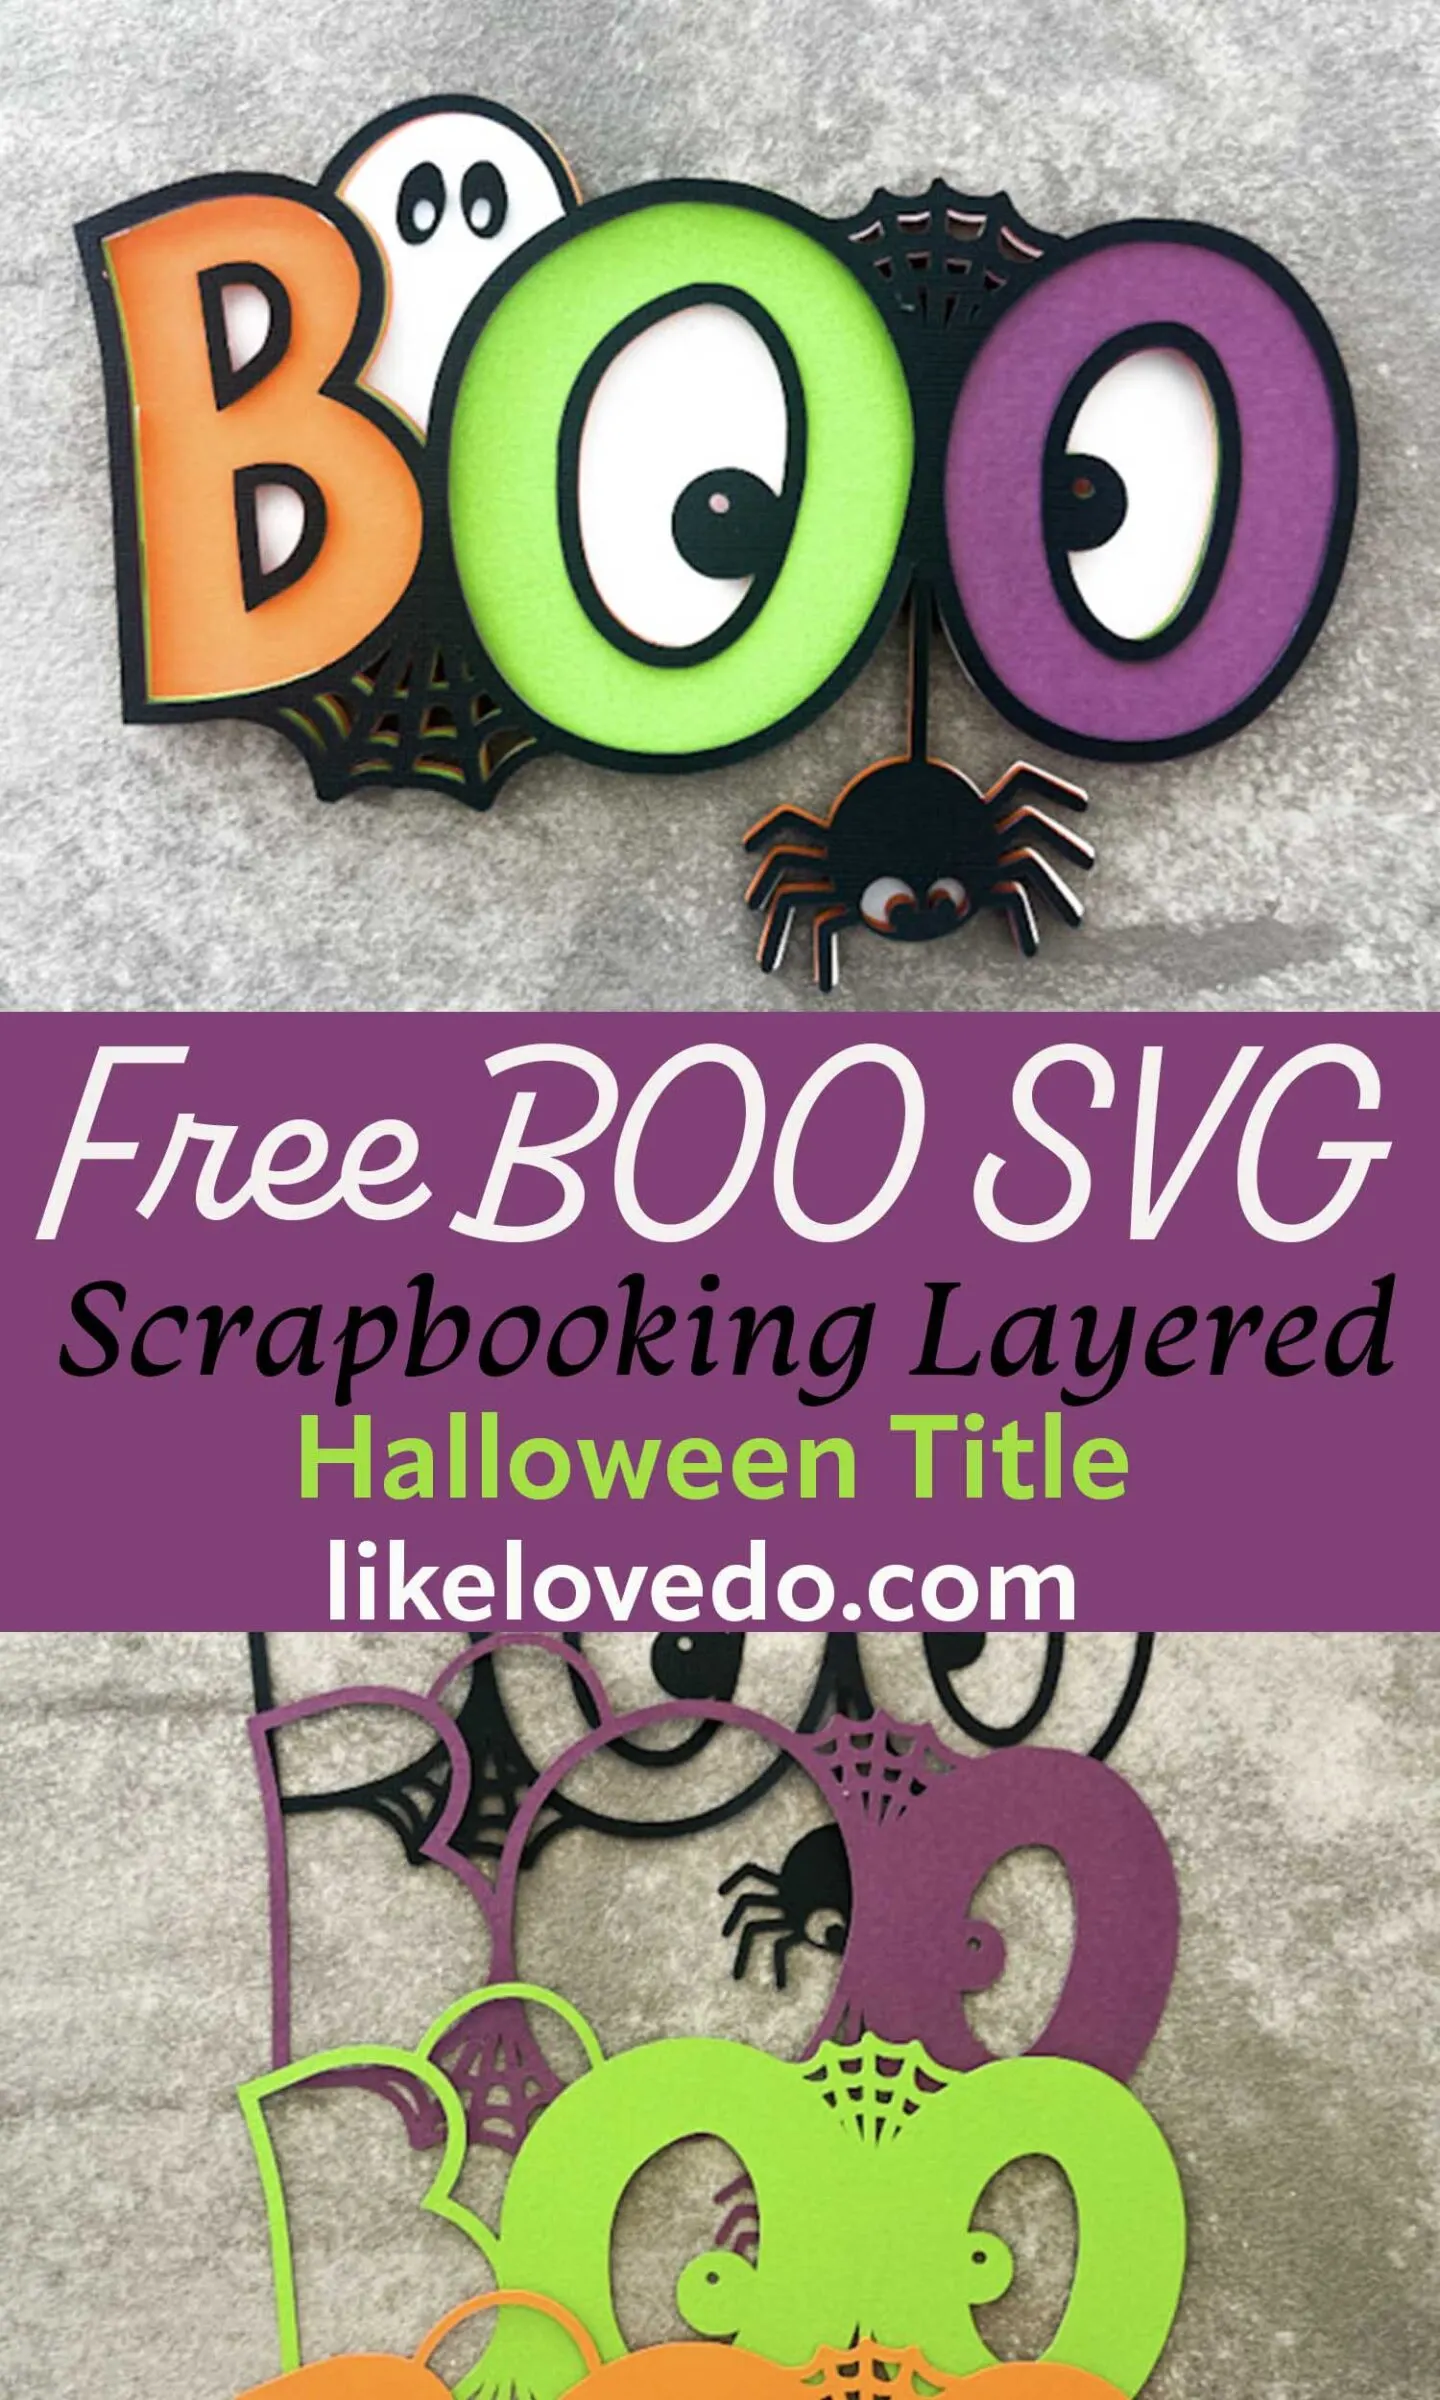 Free Layered Halloween Boo SVG Cut File for crafts pin image